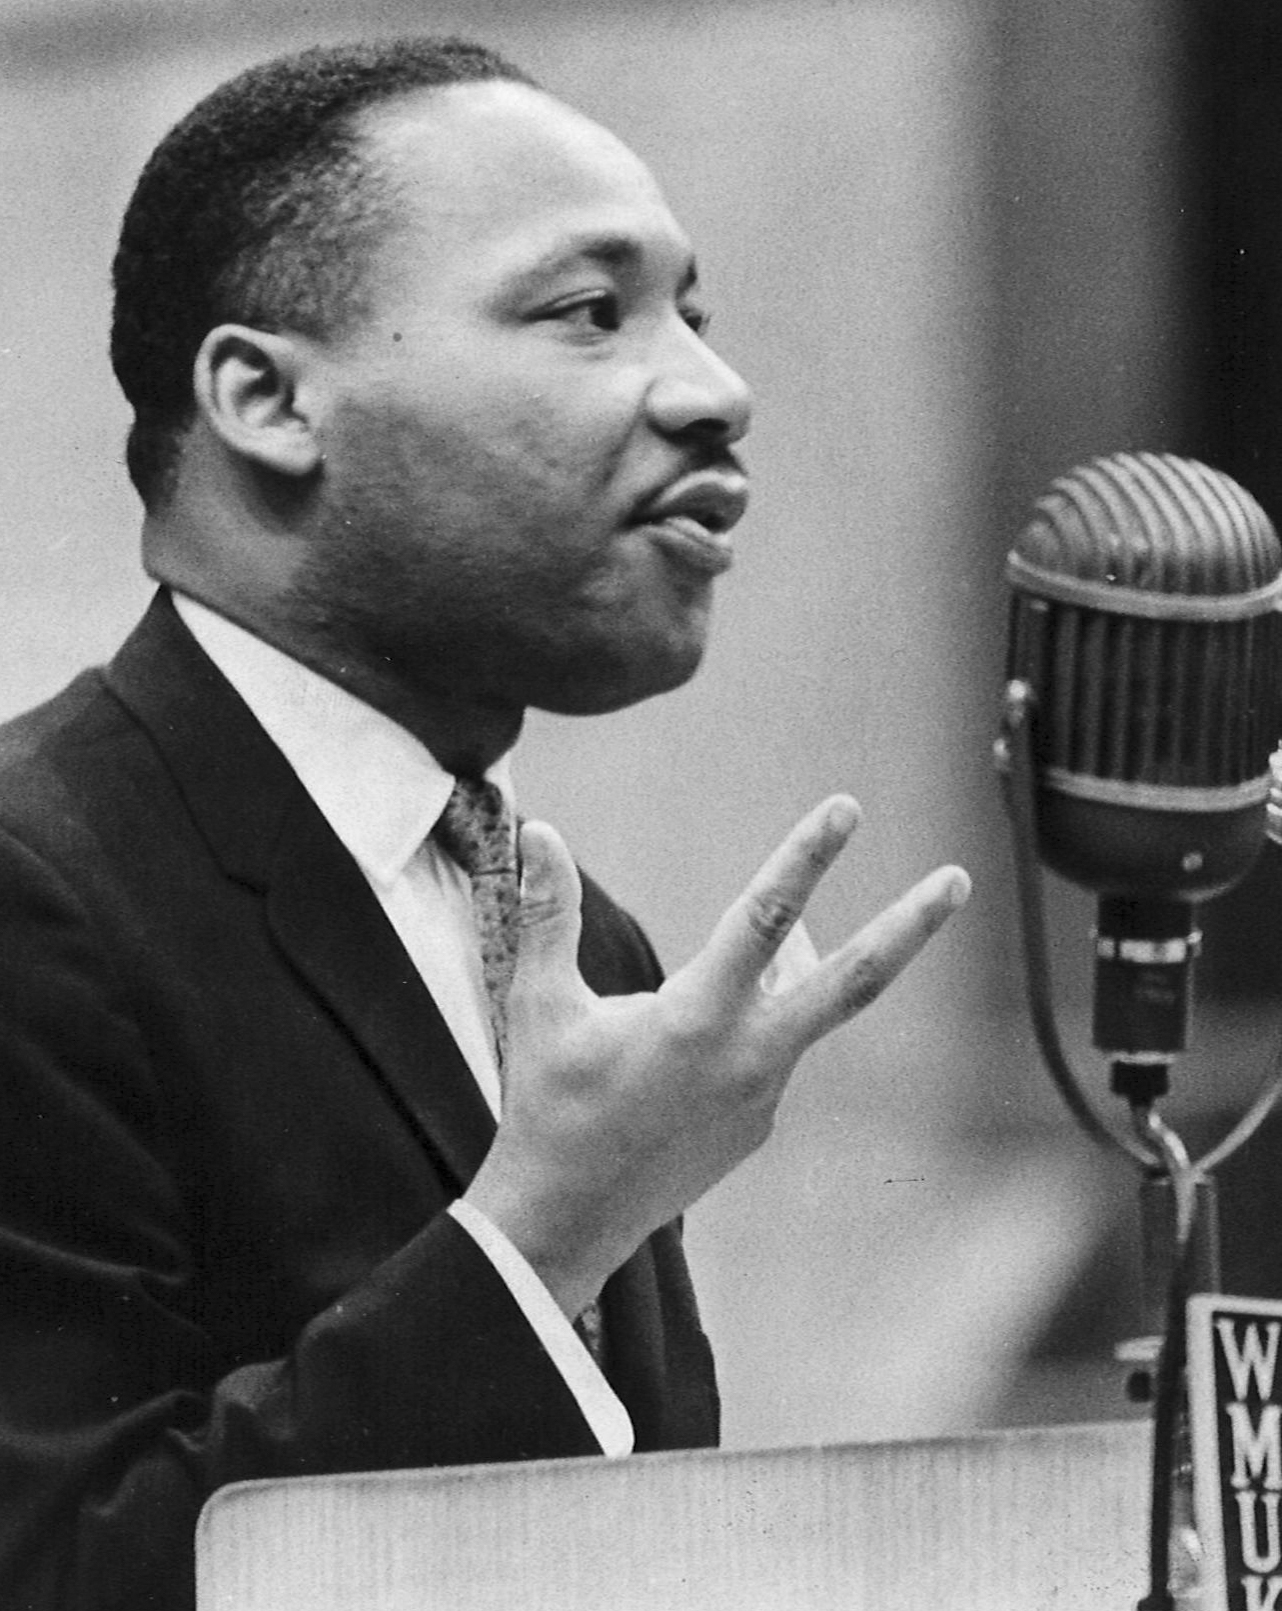 The tape of MLK's 1963 speech at WMU went missing. 24 years later